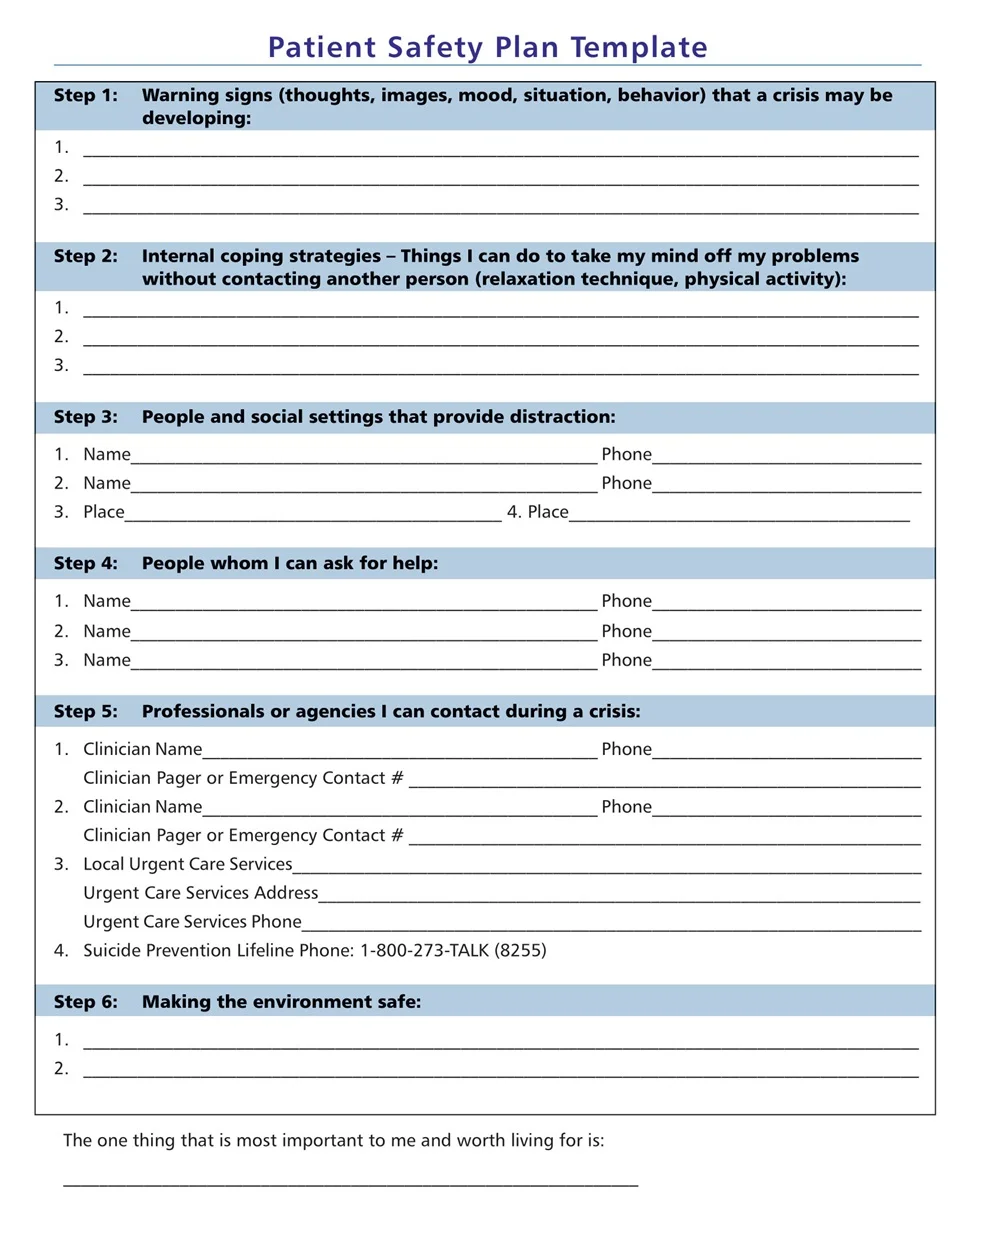 Patient Safety Plan Template